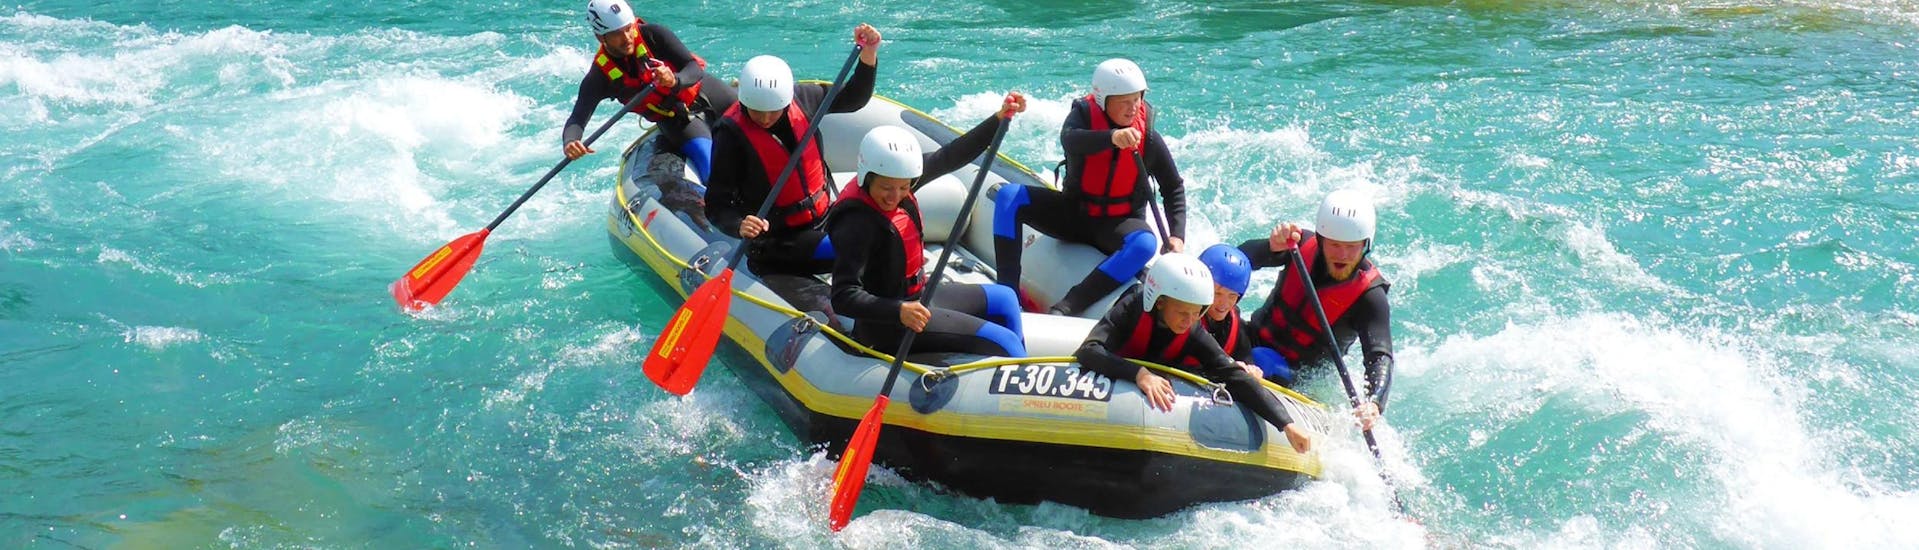 A group of rafters is navigating through a rapid on the Ziller river as a part of the Rafting & Canyoning Package - Blue Lagoon & Ziller organized by Freiluftakademie.